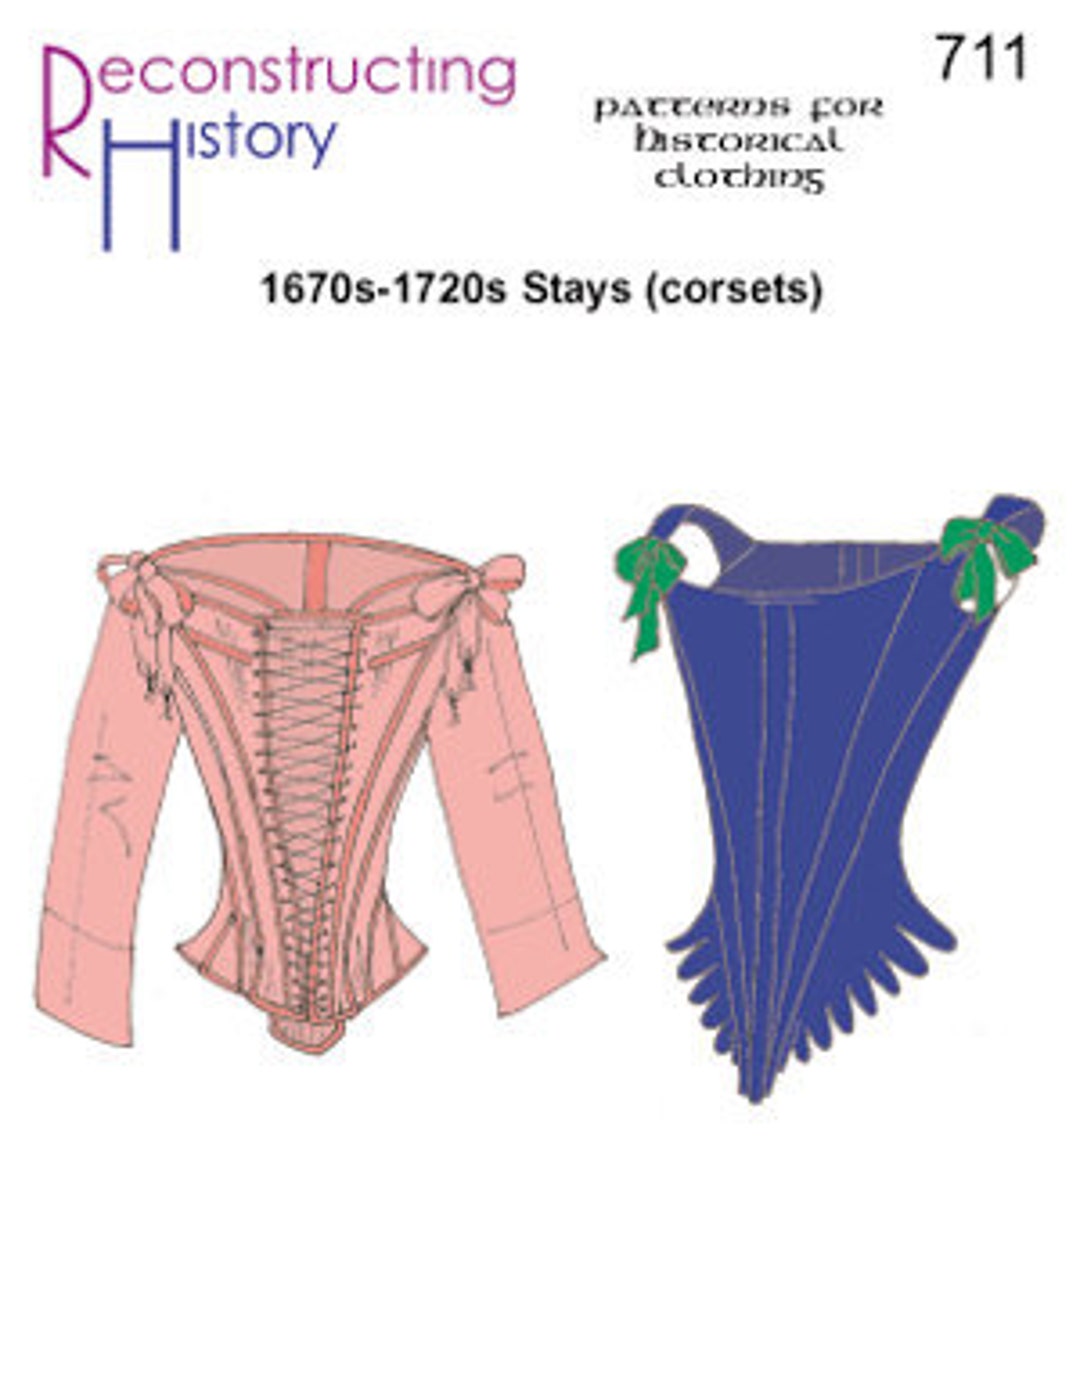 E BOOK 200 Years of Corset Design Reimagined a Collection of 10